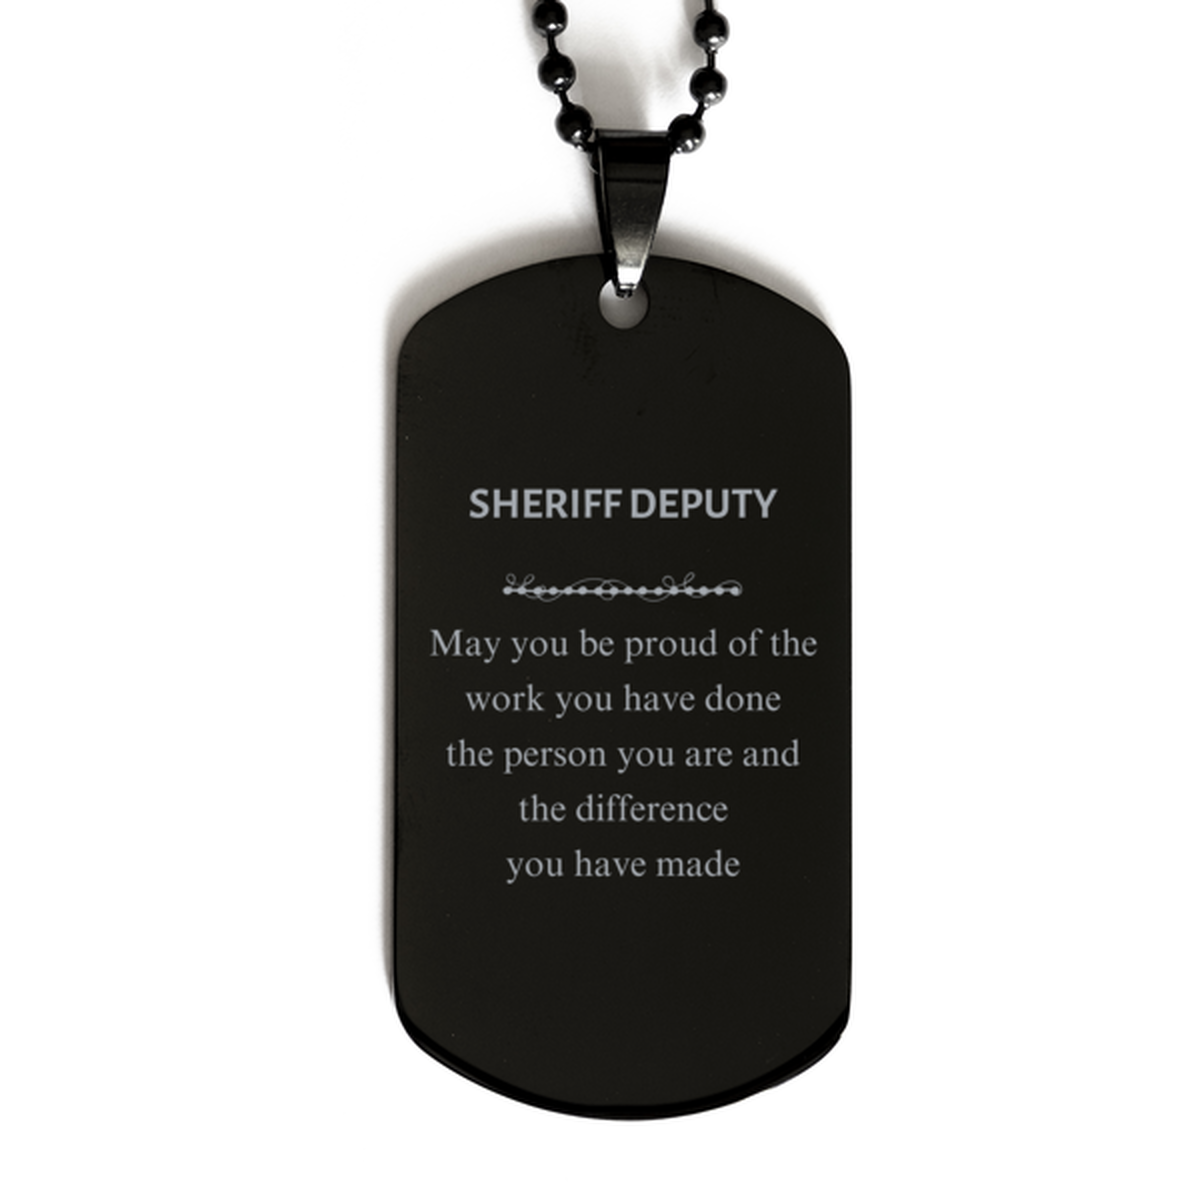 Sheriff Deputy May you be proud of the work you have done, Retirement Sheriff Deputy Black Dog Tag for Colleague Appreciation Gifts Amazing for Sheriff Deputy